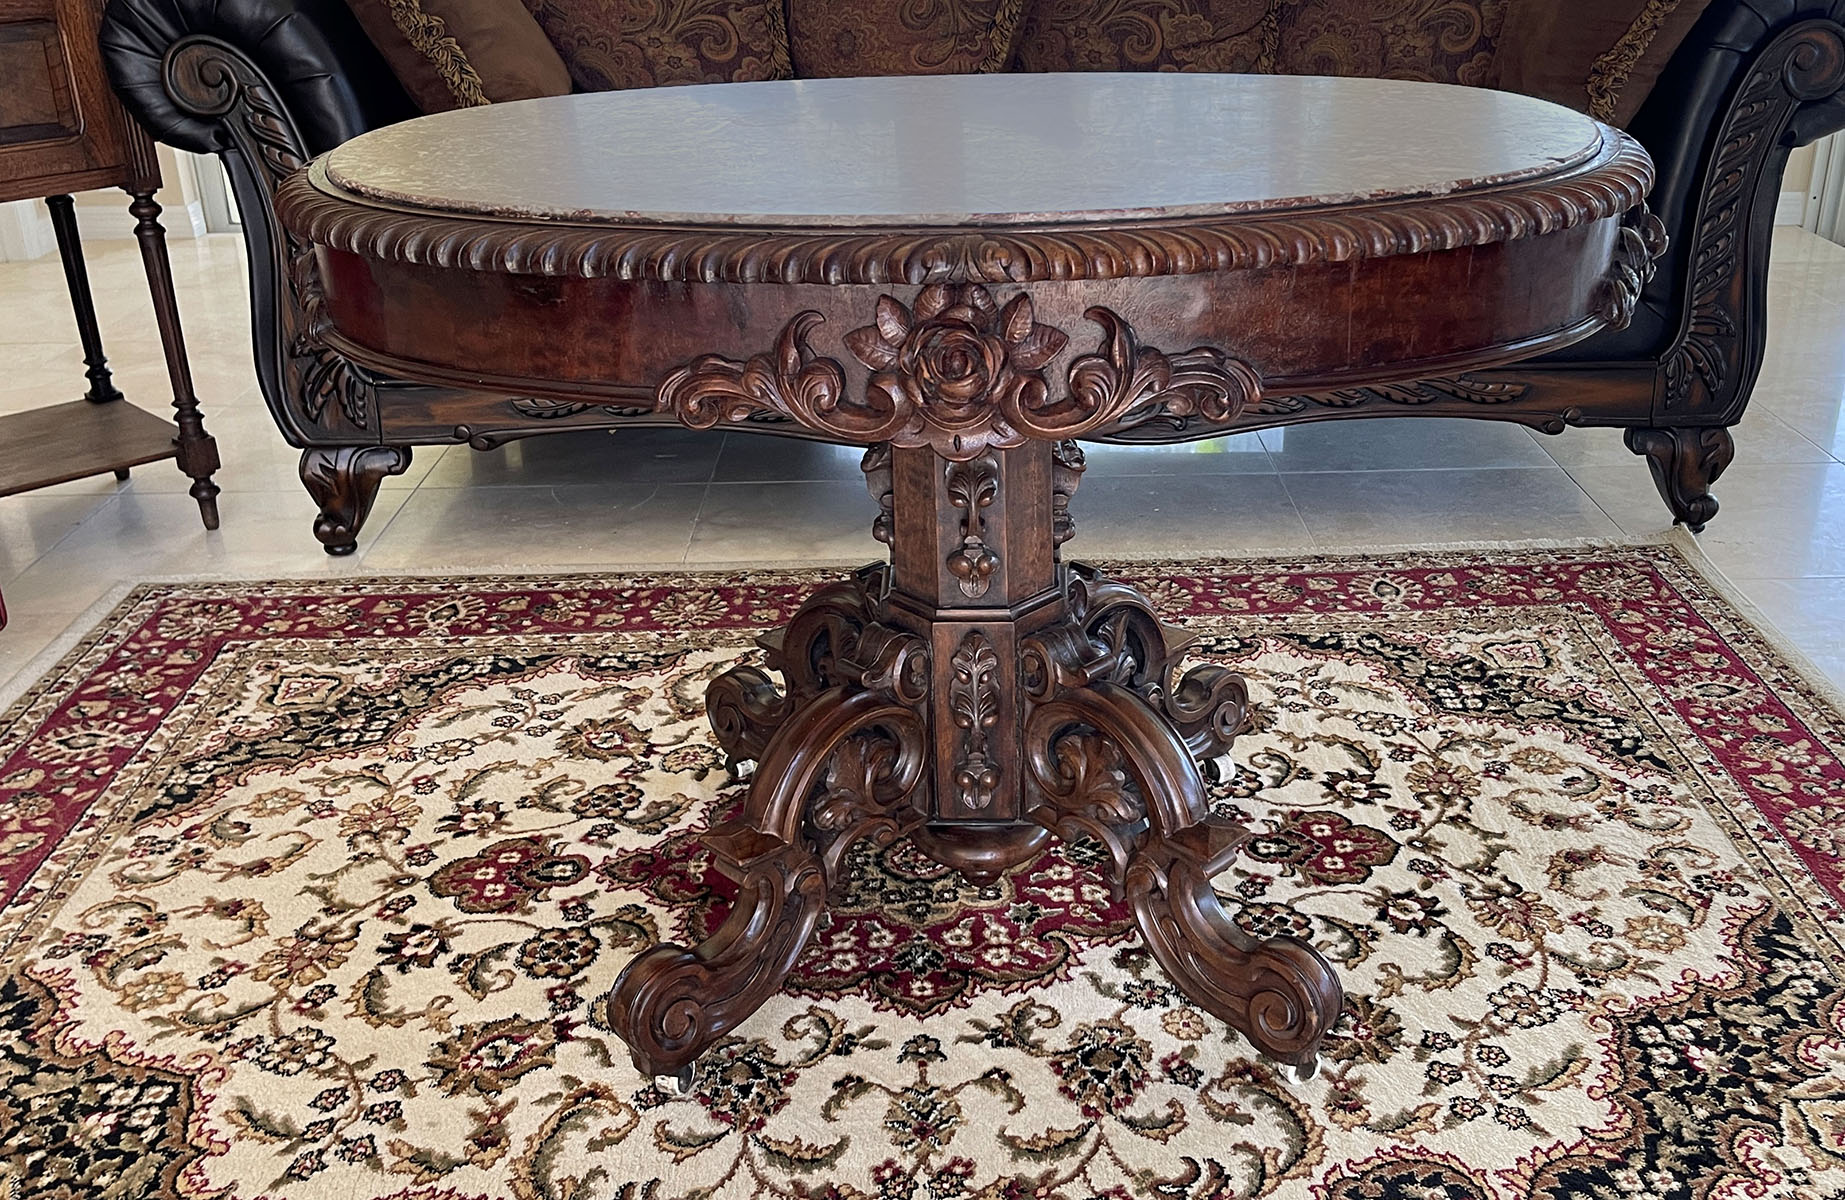 PROFUSELY CARVED OVAL MARBLE TOP 2ece20